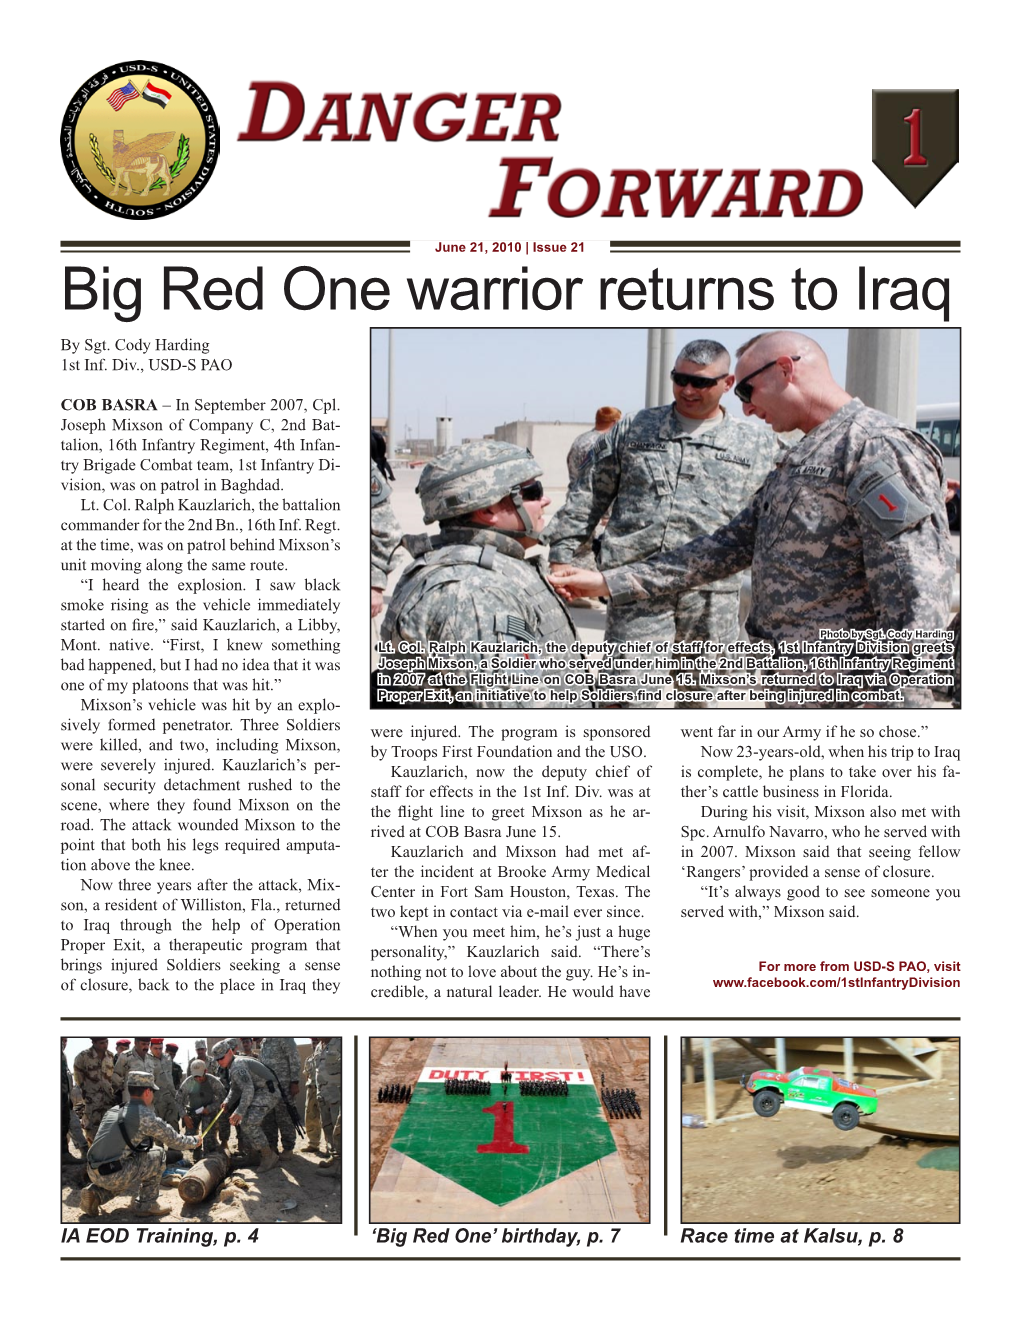 Big Red One Warrior Returns to Iraq by Sgt